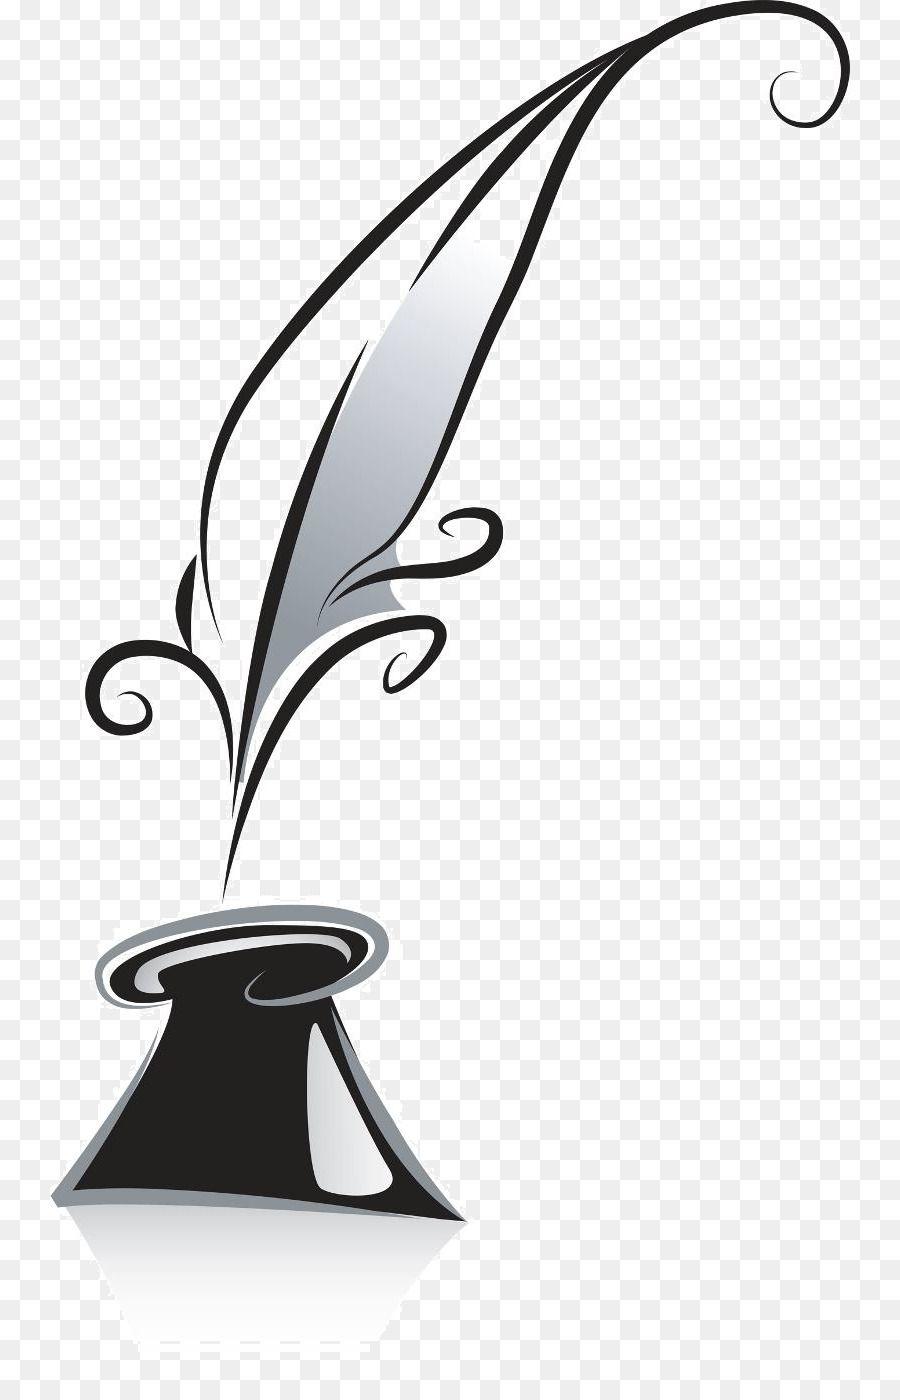 Black and White Quill Logo - Quill Poetry Pen name png download